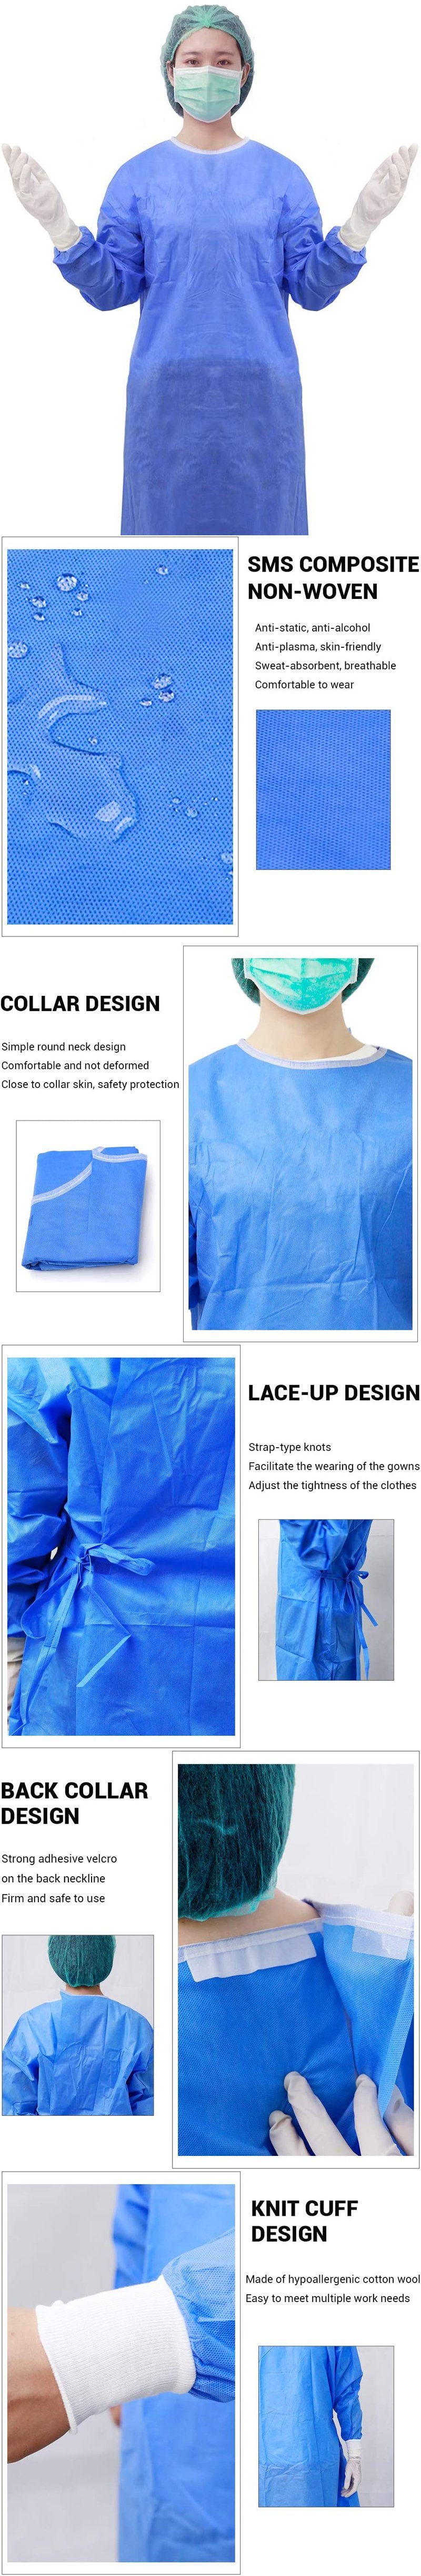 Sterile Isolation Gown SMS Reinforced Gown Isolation Suit Non-Sterile Gown Isolation